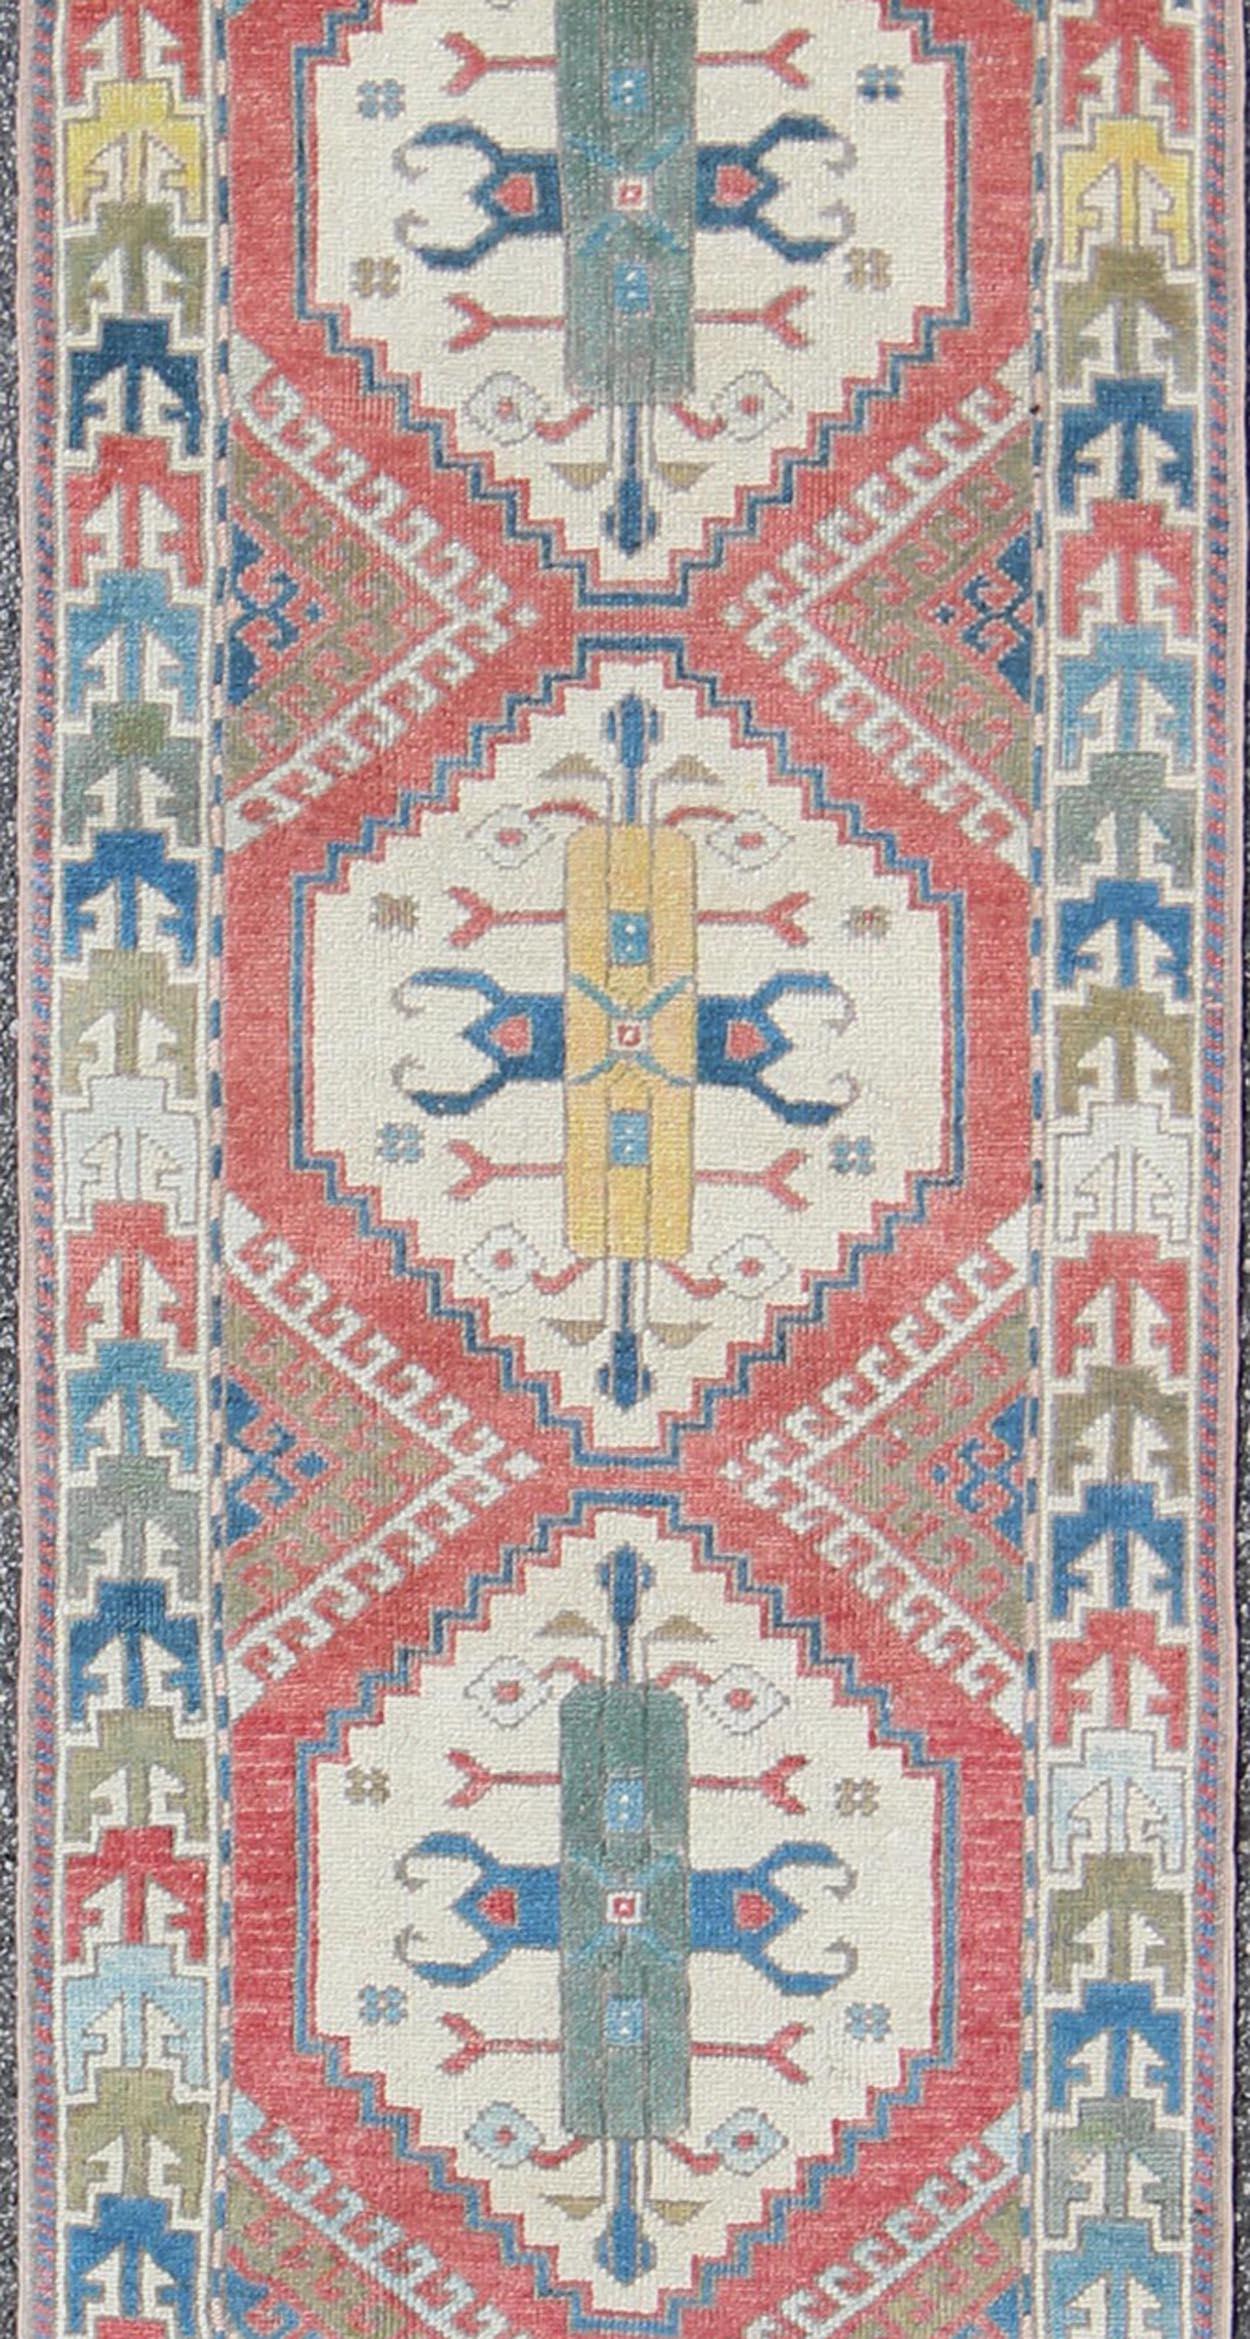 Vintage Oushak runner from Turkey with Medallion design in various blue, soft red, green, yellow and tan tones, rug EN-165744, country of origin / type: Turkey / Oushak, circa 1940

This vintage Turkish runner from Turkey features an arrangement of